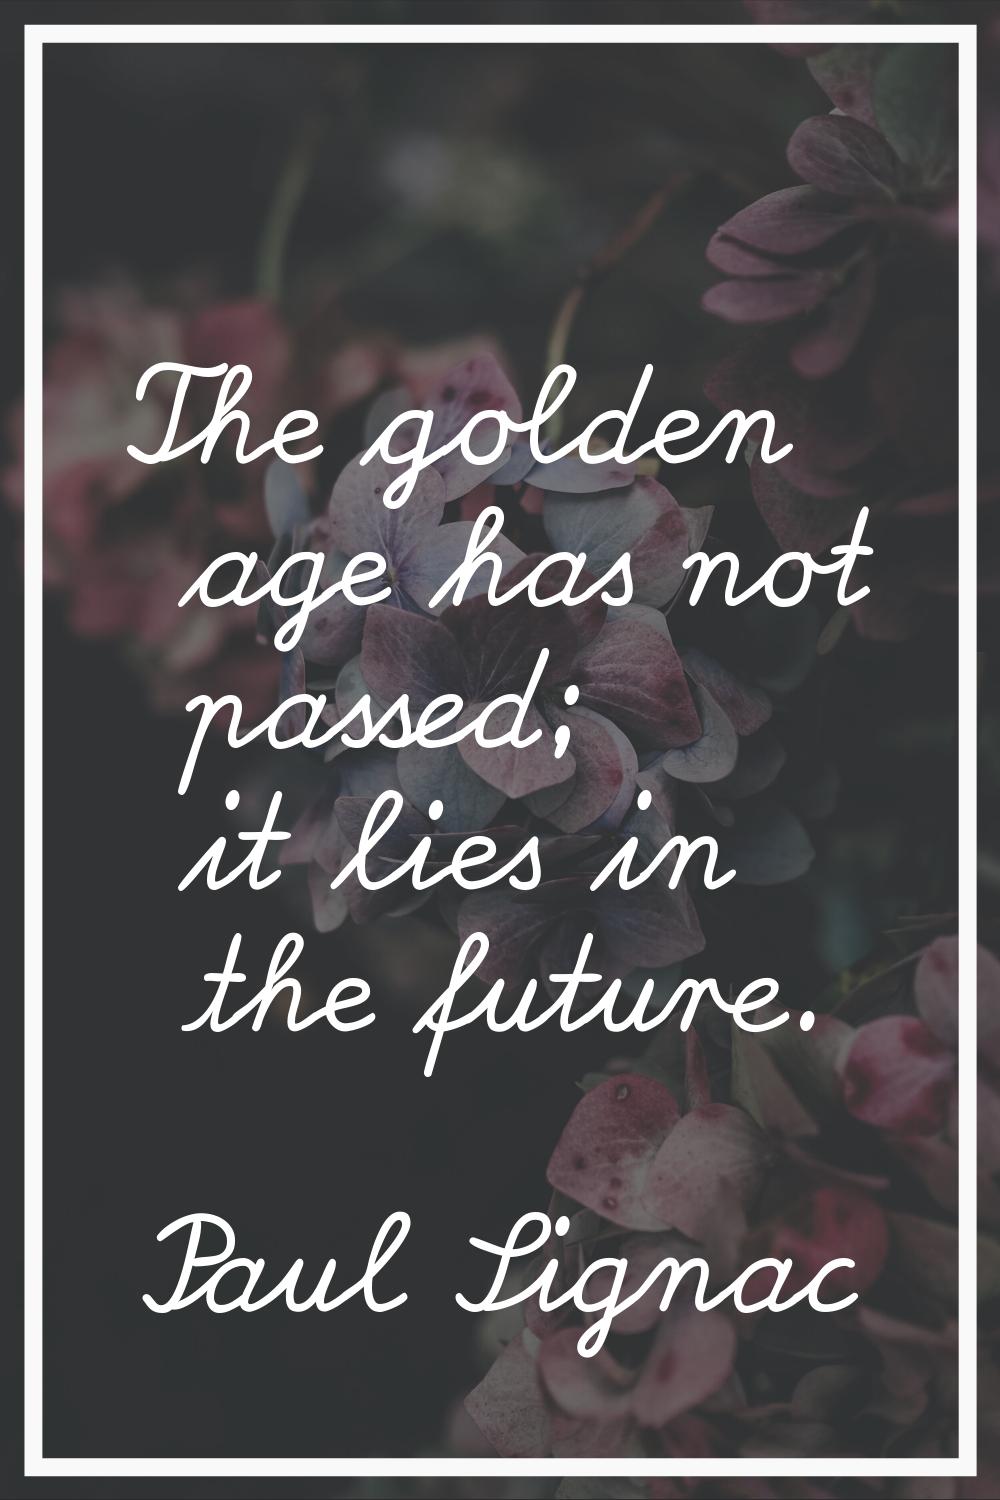 The golden age has not passed; it lies in the future.